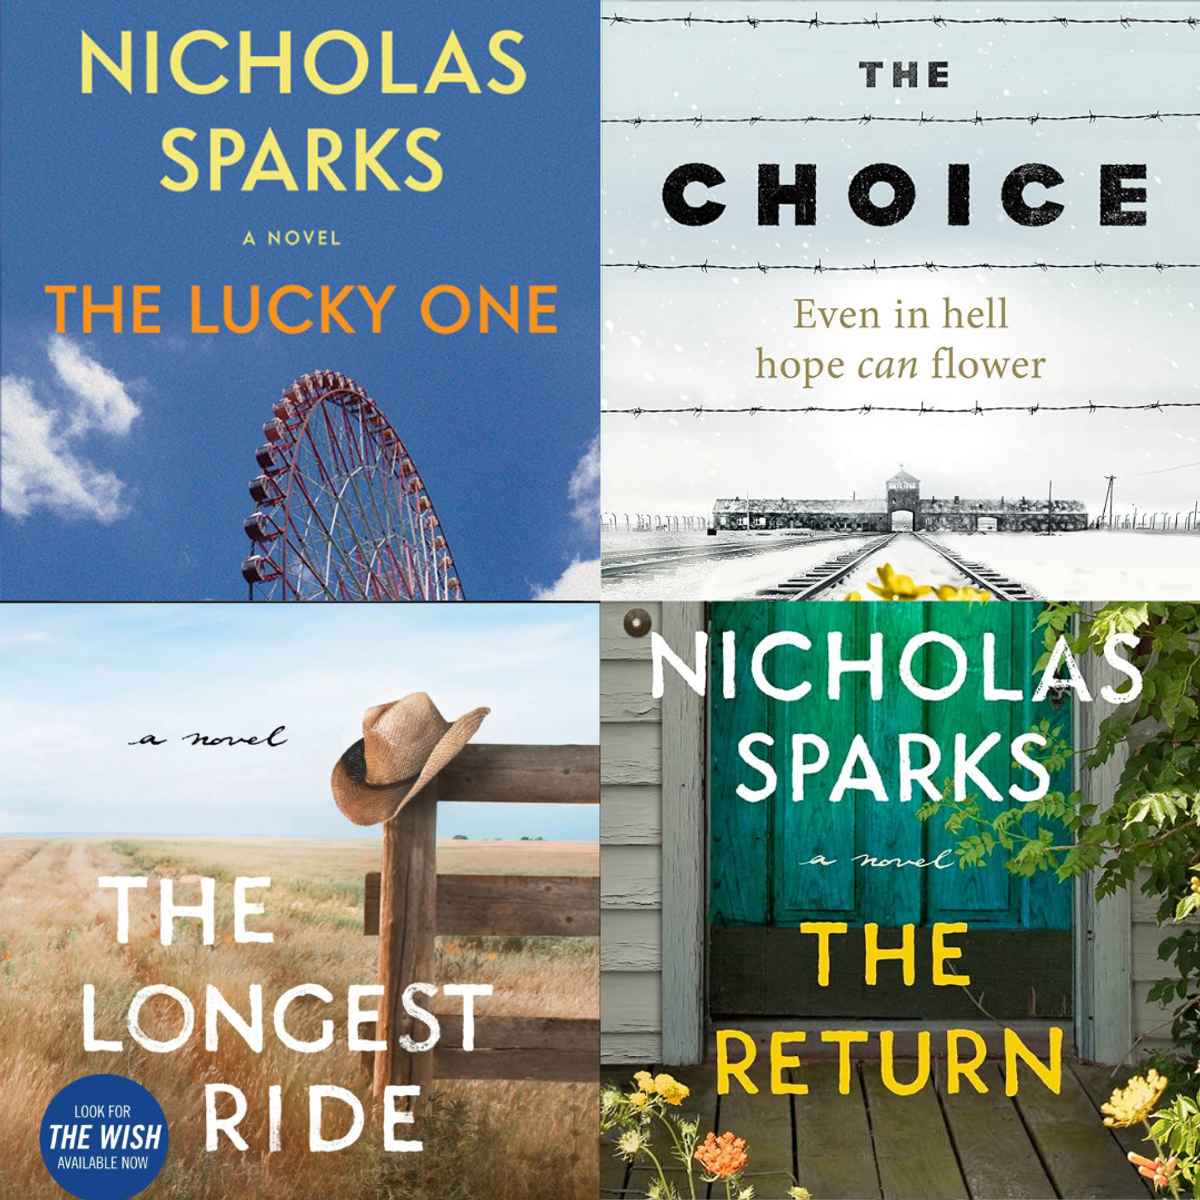 Need A Good Cry? Here Are 8 Nicholas Sparks Books To Help With That